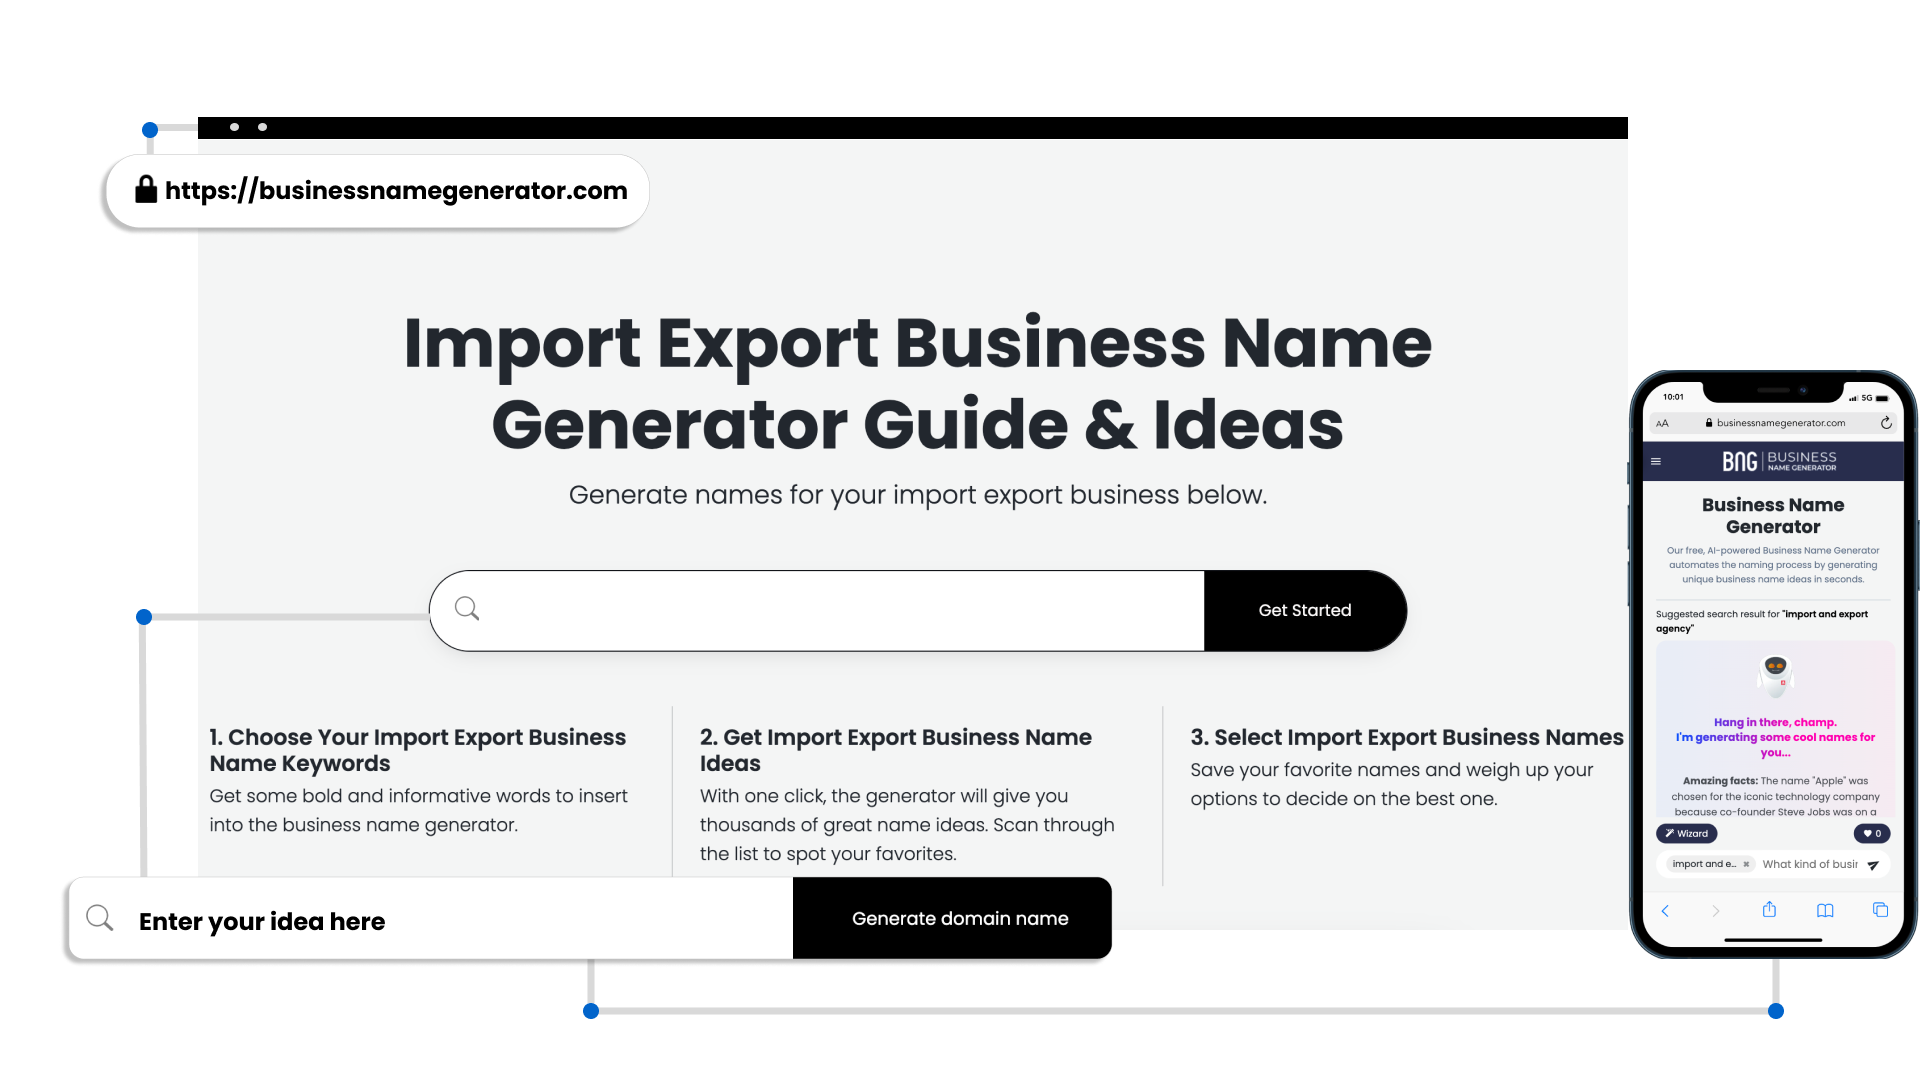 Benefits of Our Export Business Name Generator